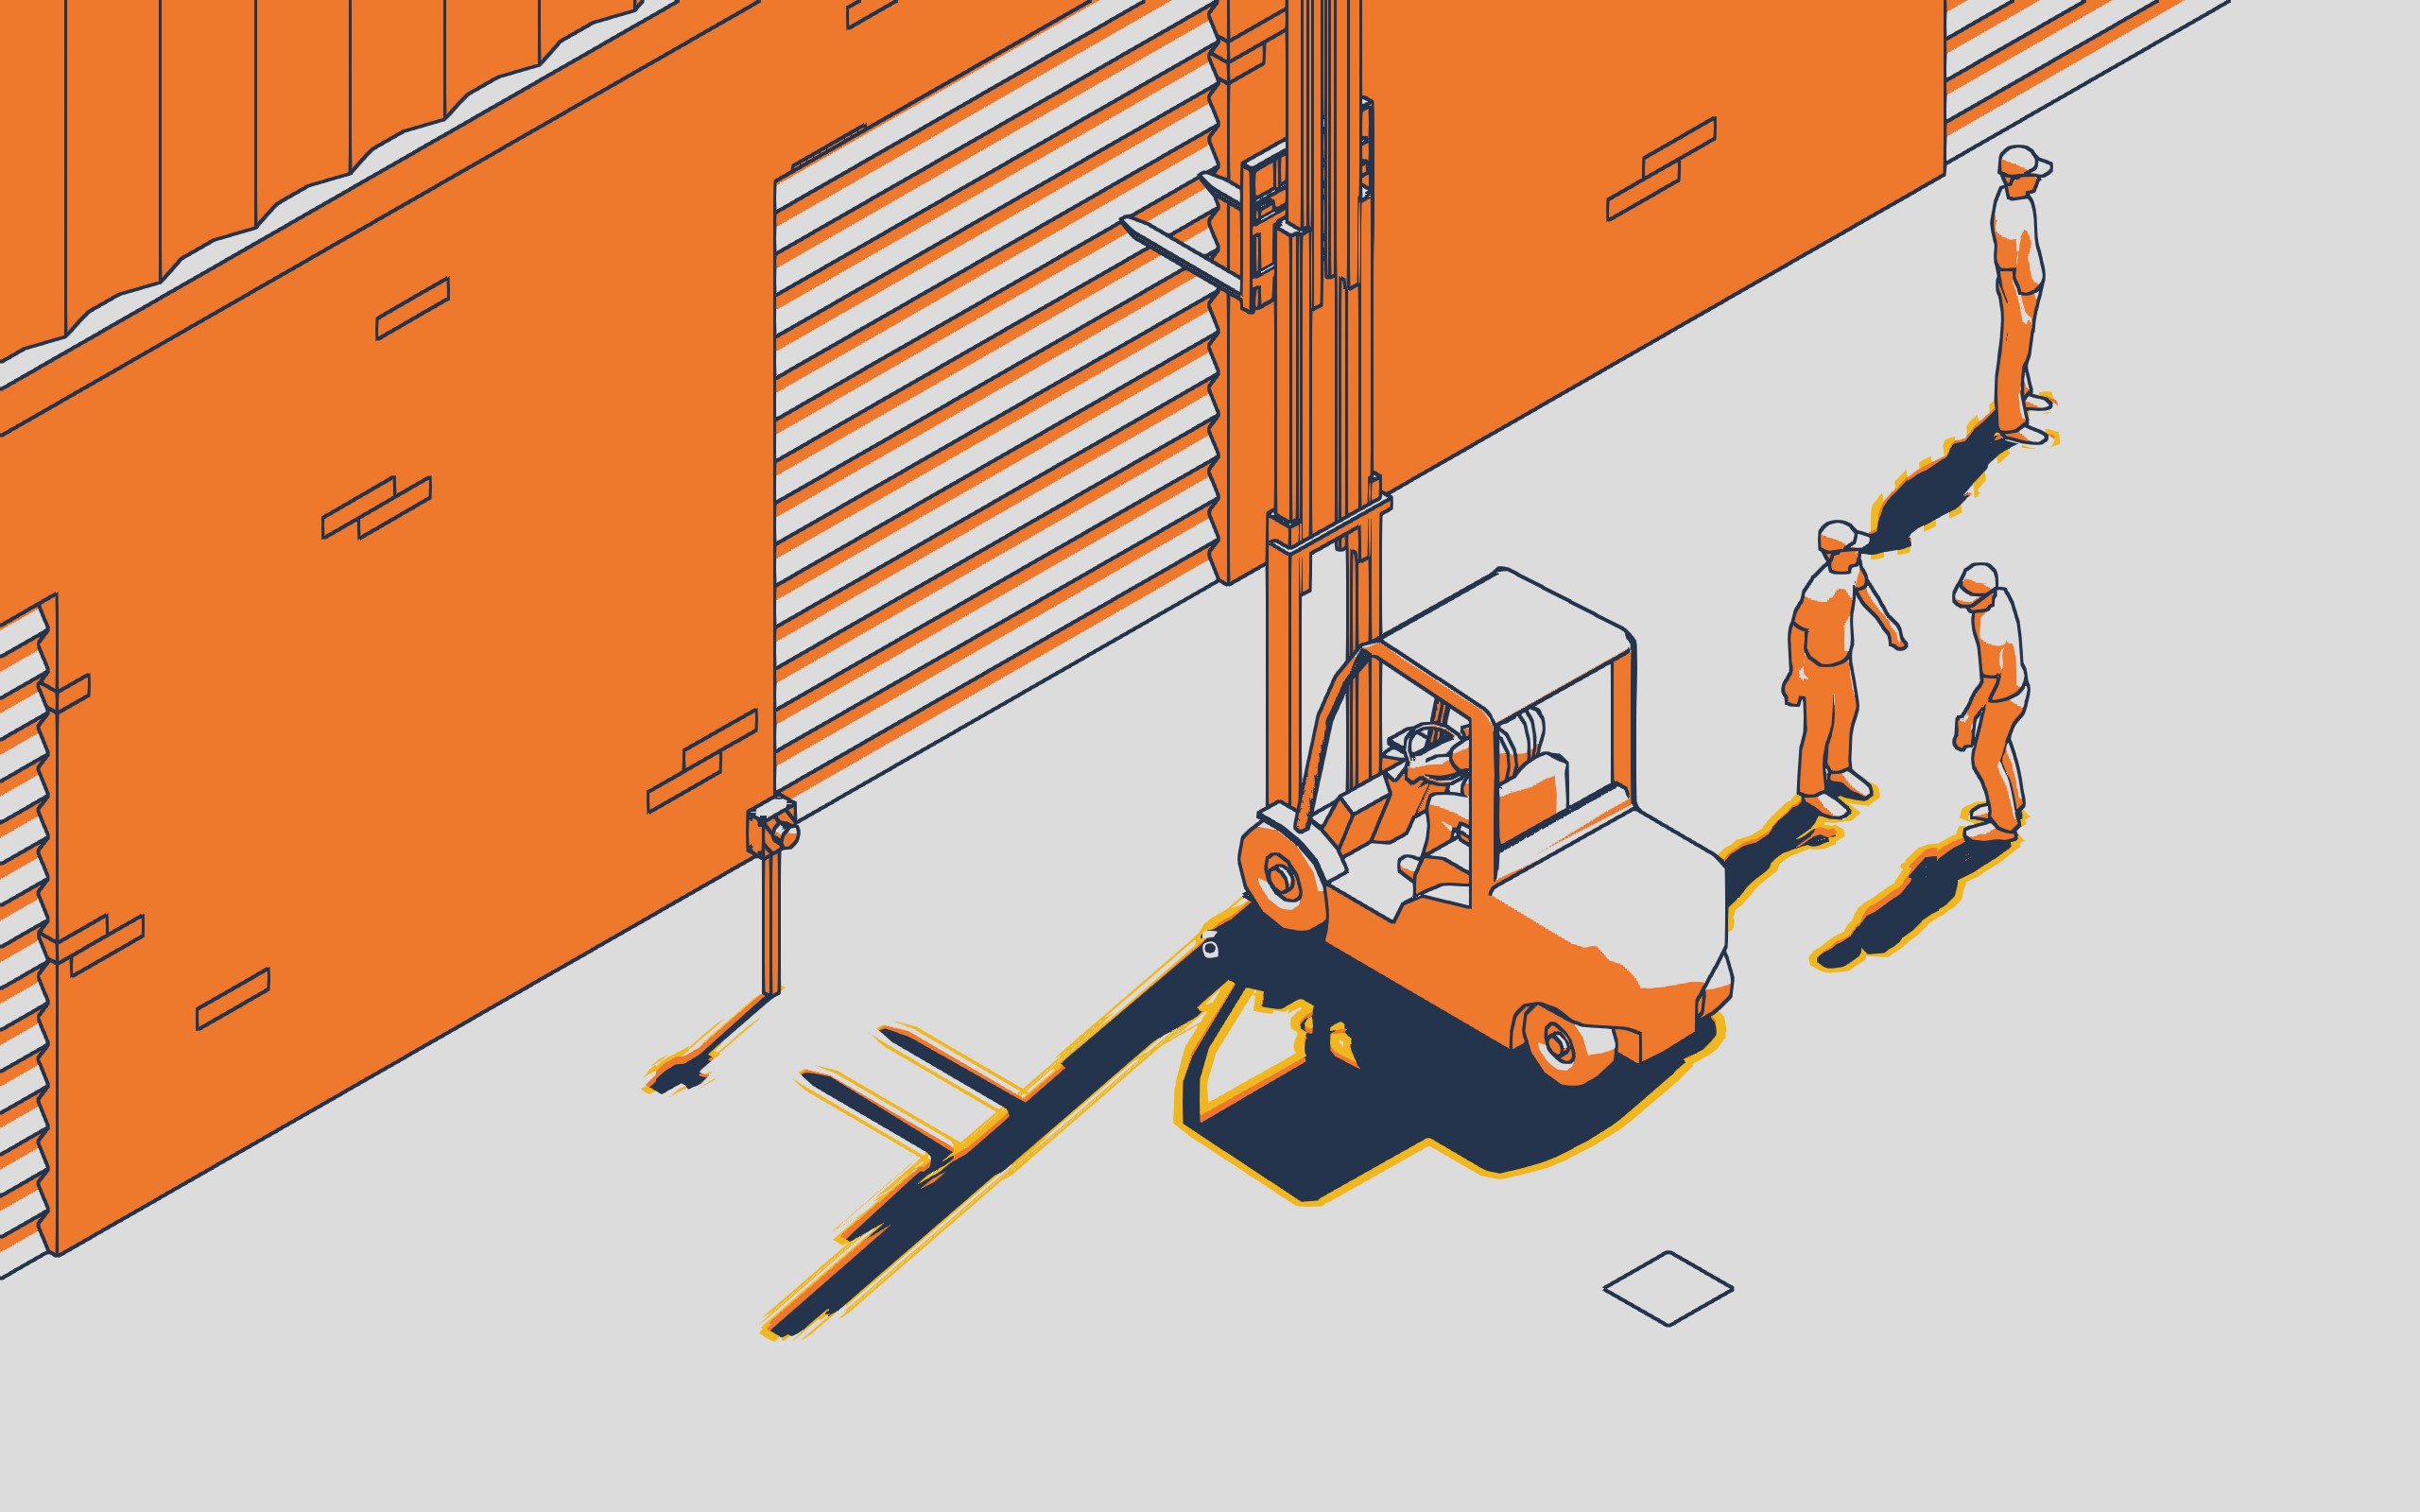 A forklift approaches a factory.